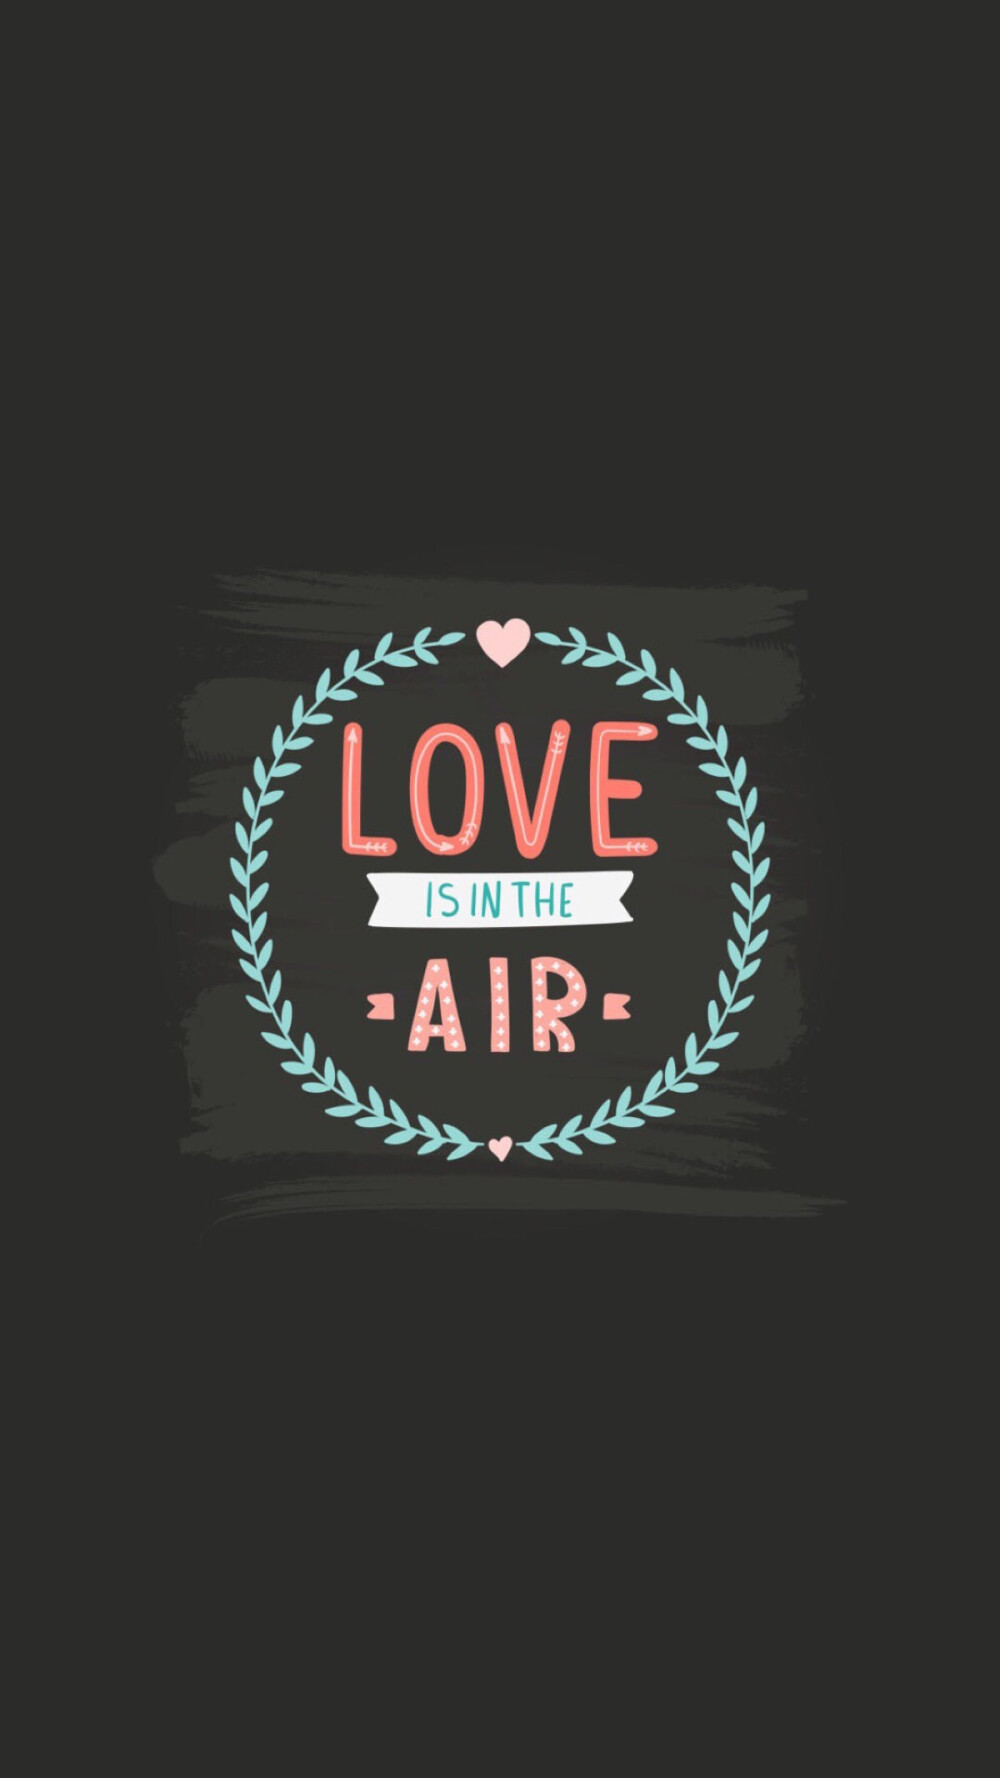 love is in the air 壁纸～